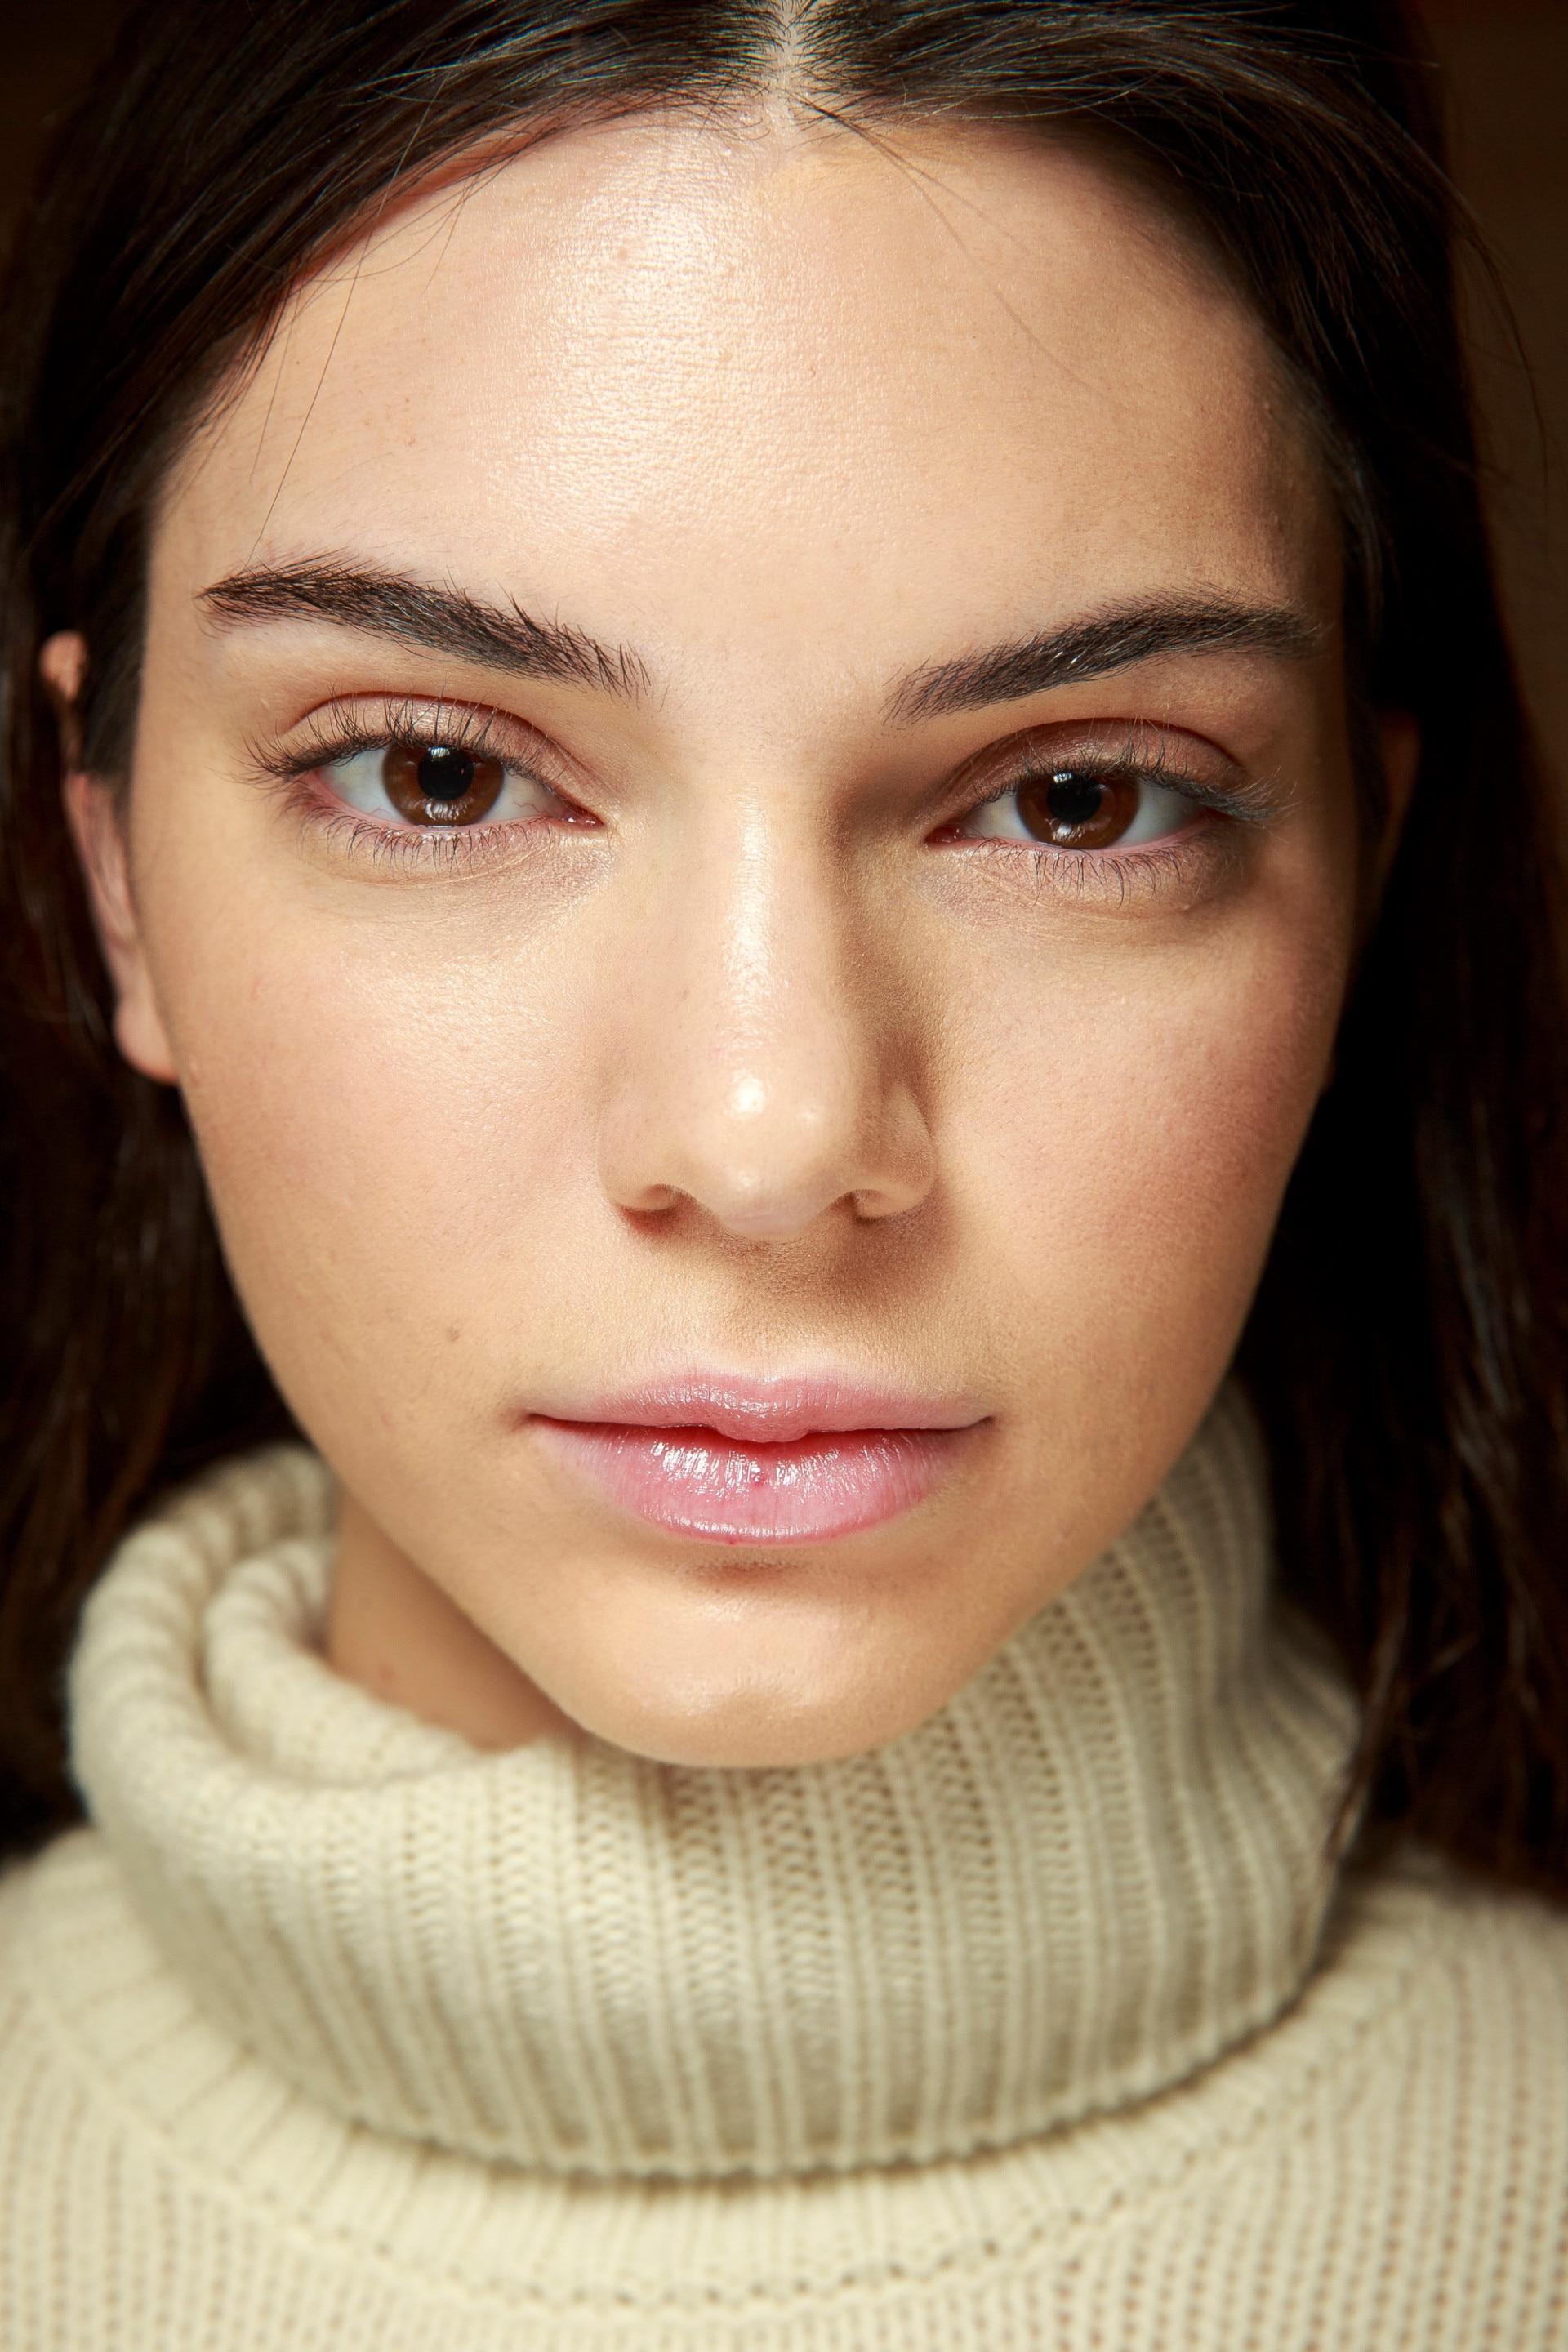 Five all-natural hacks for ridding dark circles that actually work